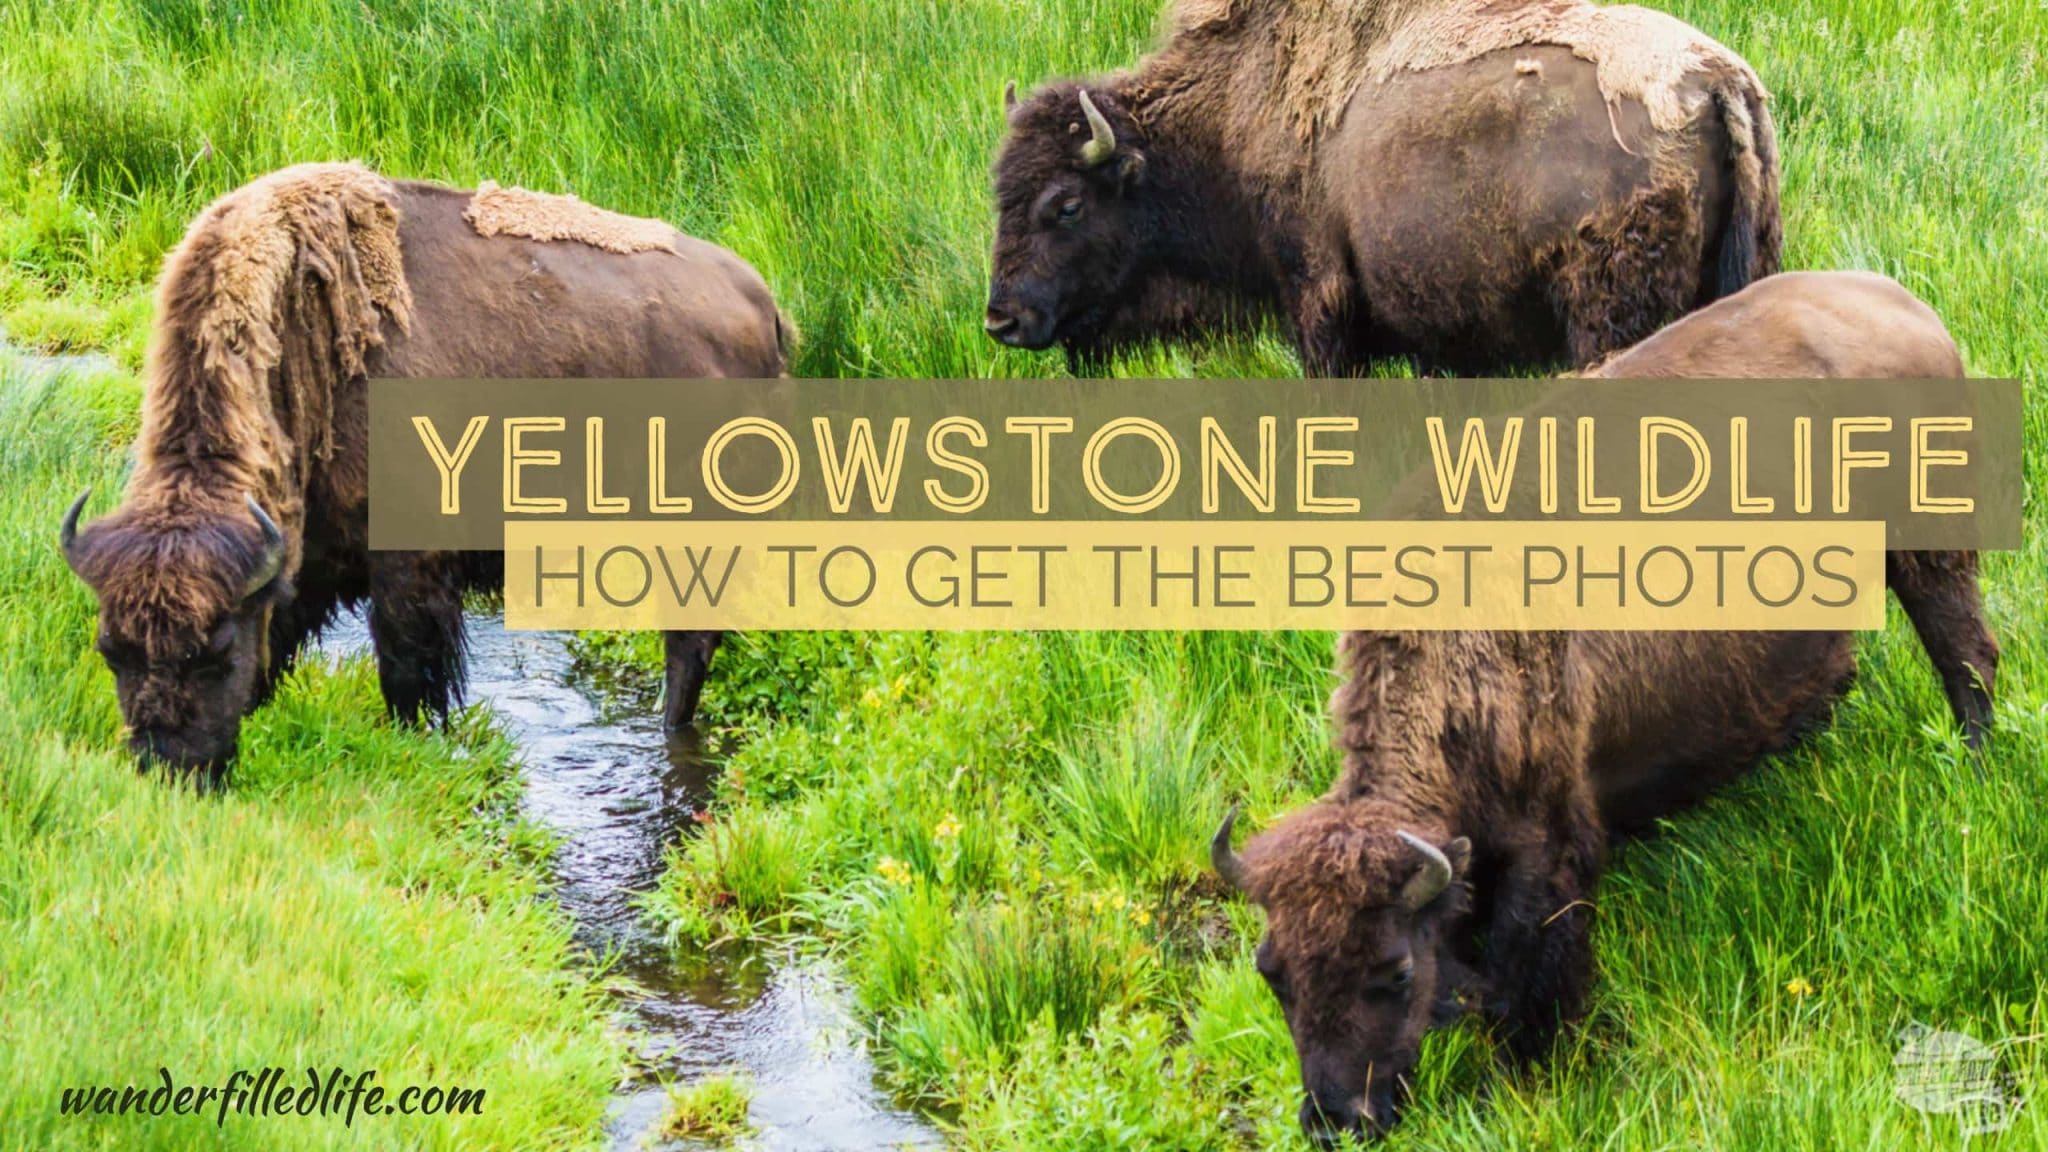 Finding and Photographing Yellowstone Wildlife